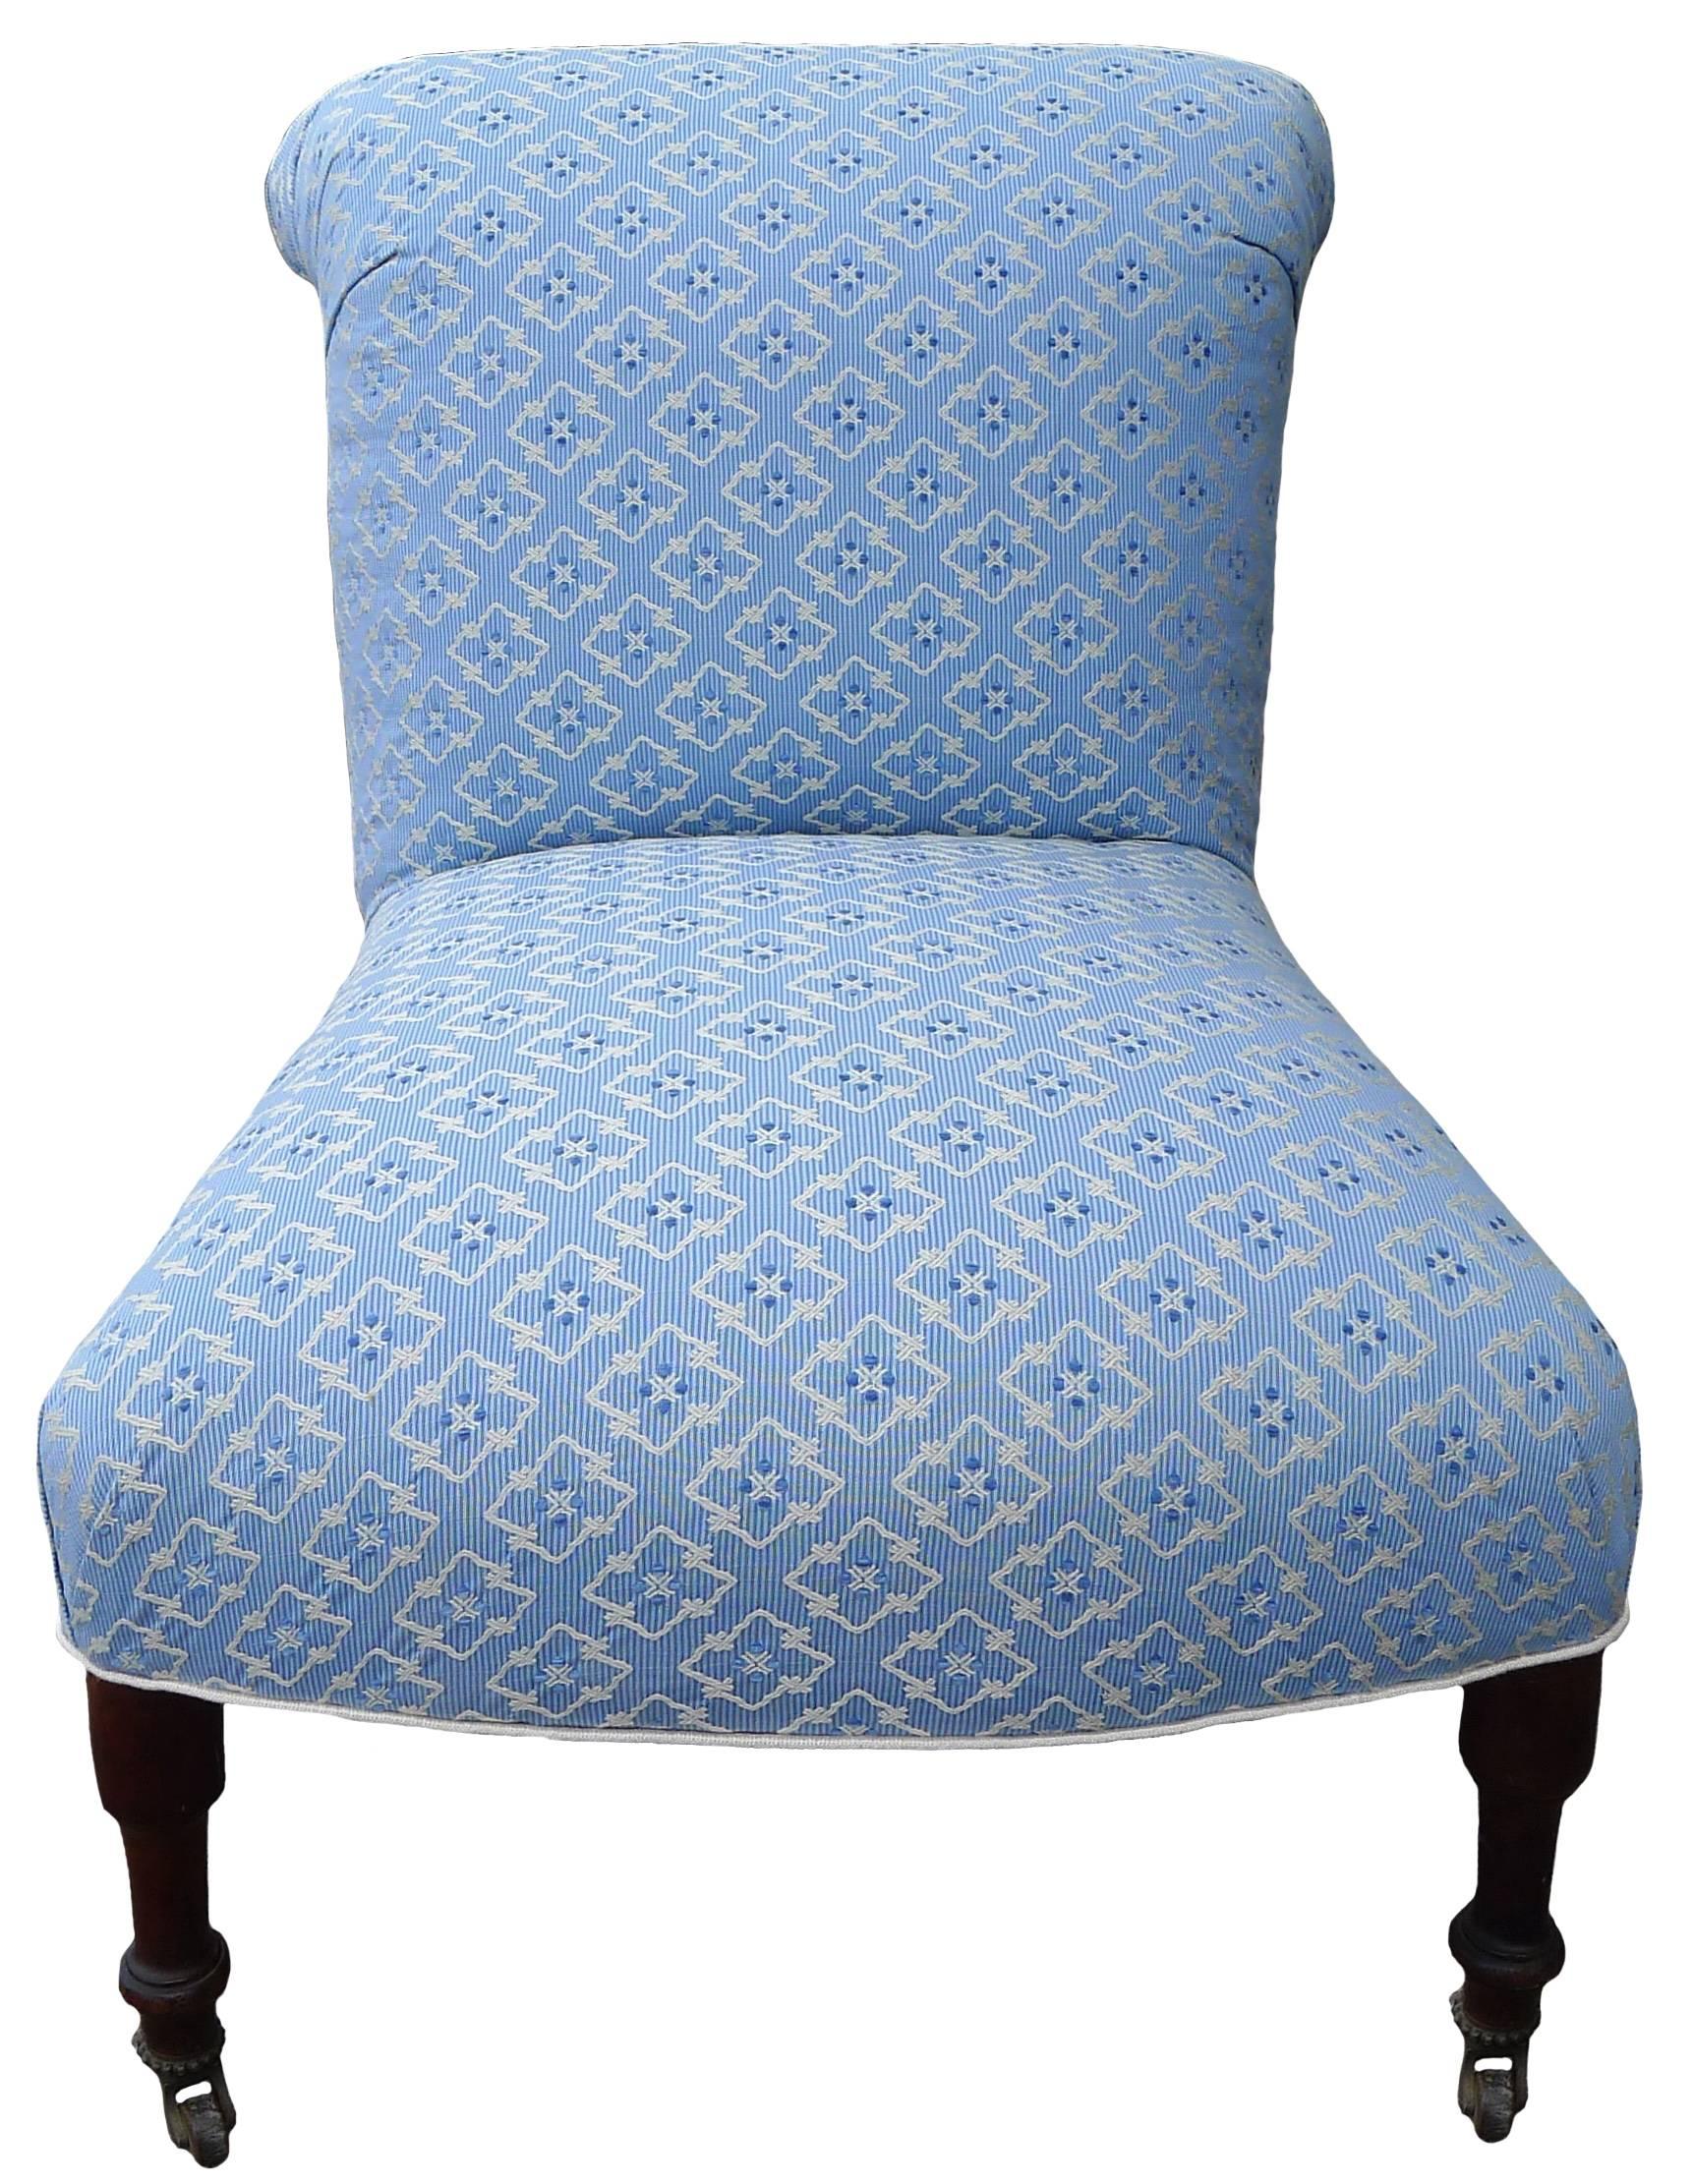 19th century French Napoléon III slipper chair. Fully restored and newly upholstered in Brunschwig & Fils 'Creek Figured Woven' in light blue with Samuel & Sons cream piping. Original front casters and turned legs with light wear. Seat